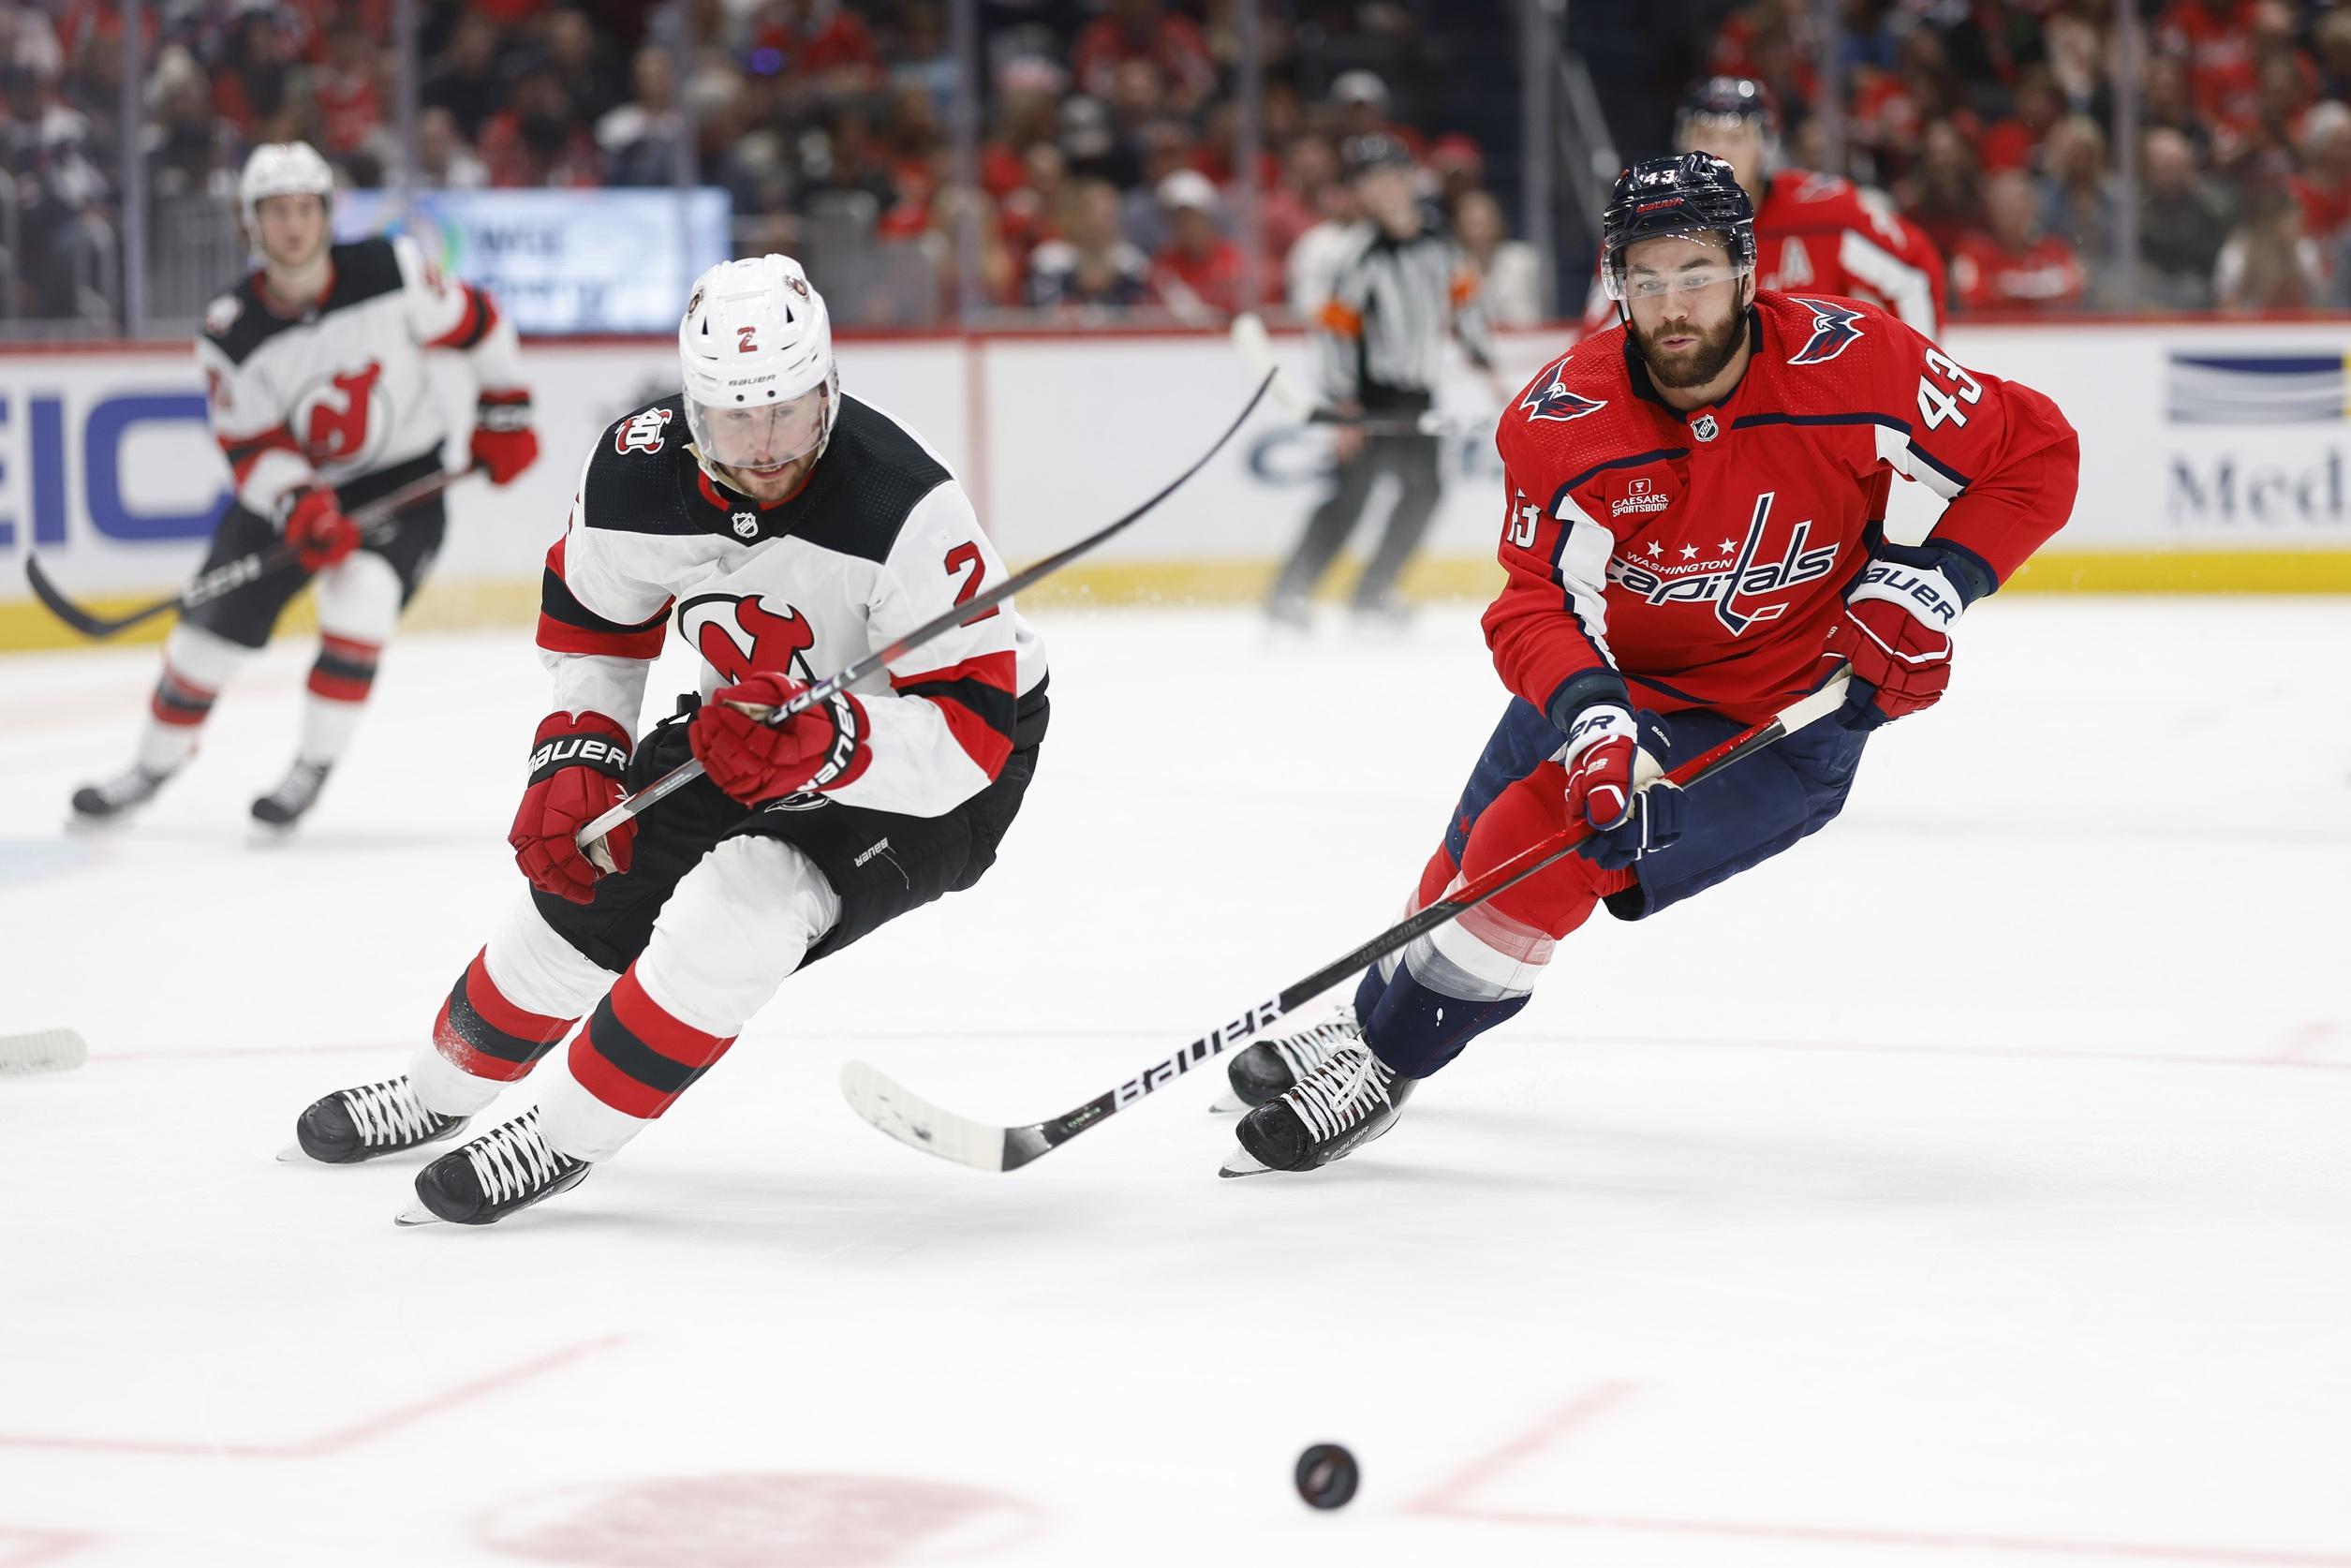 New Jersey Devils defenseman Brendan Smith (2) and Washington Capitals right wing Tom Wilson (43) battle for the puck in the second period at Capital One Arena. / Geoff Burke-USA TODAY Sports